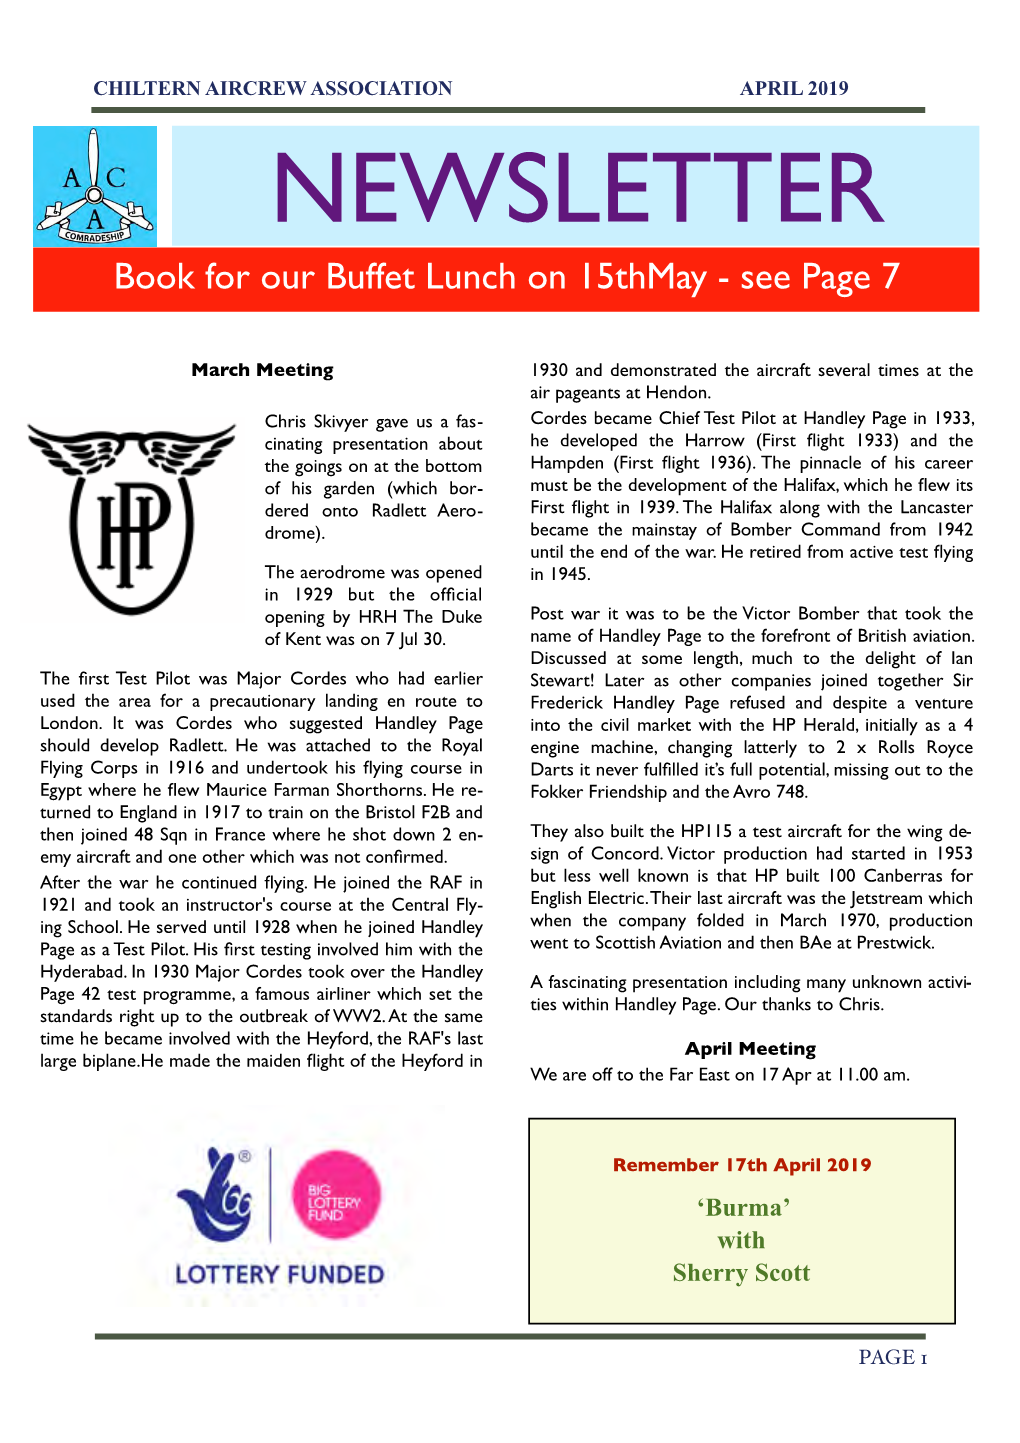 NEWSLETTER Book for Our Buffet Lunch on 15Thmay - See Page 7